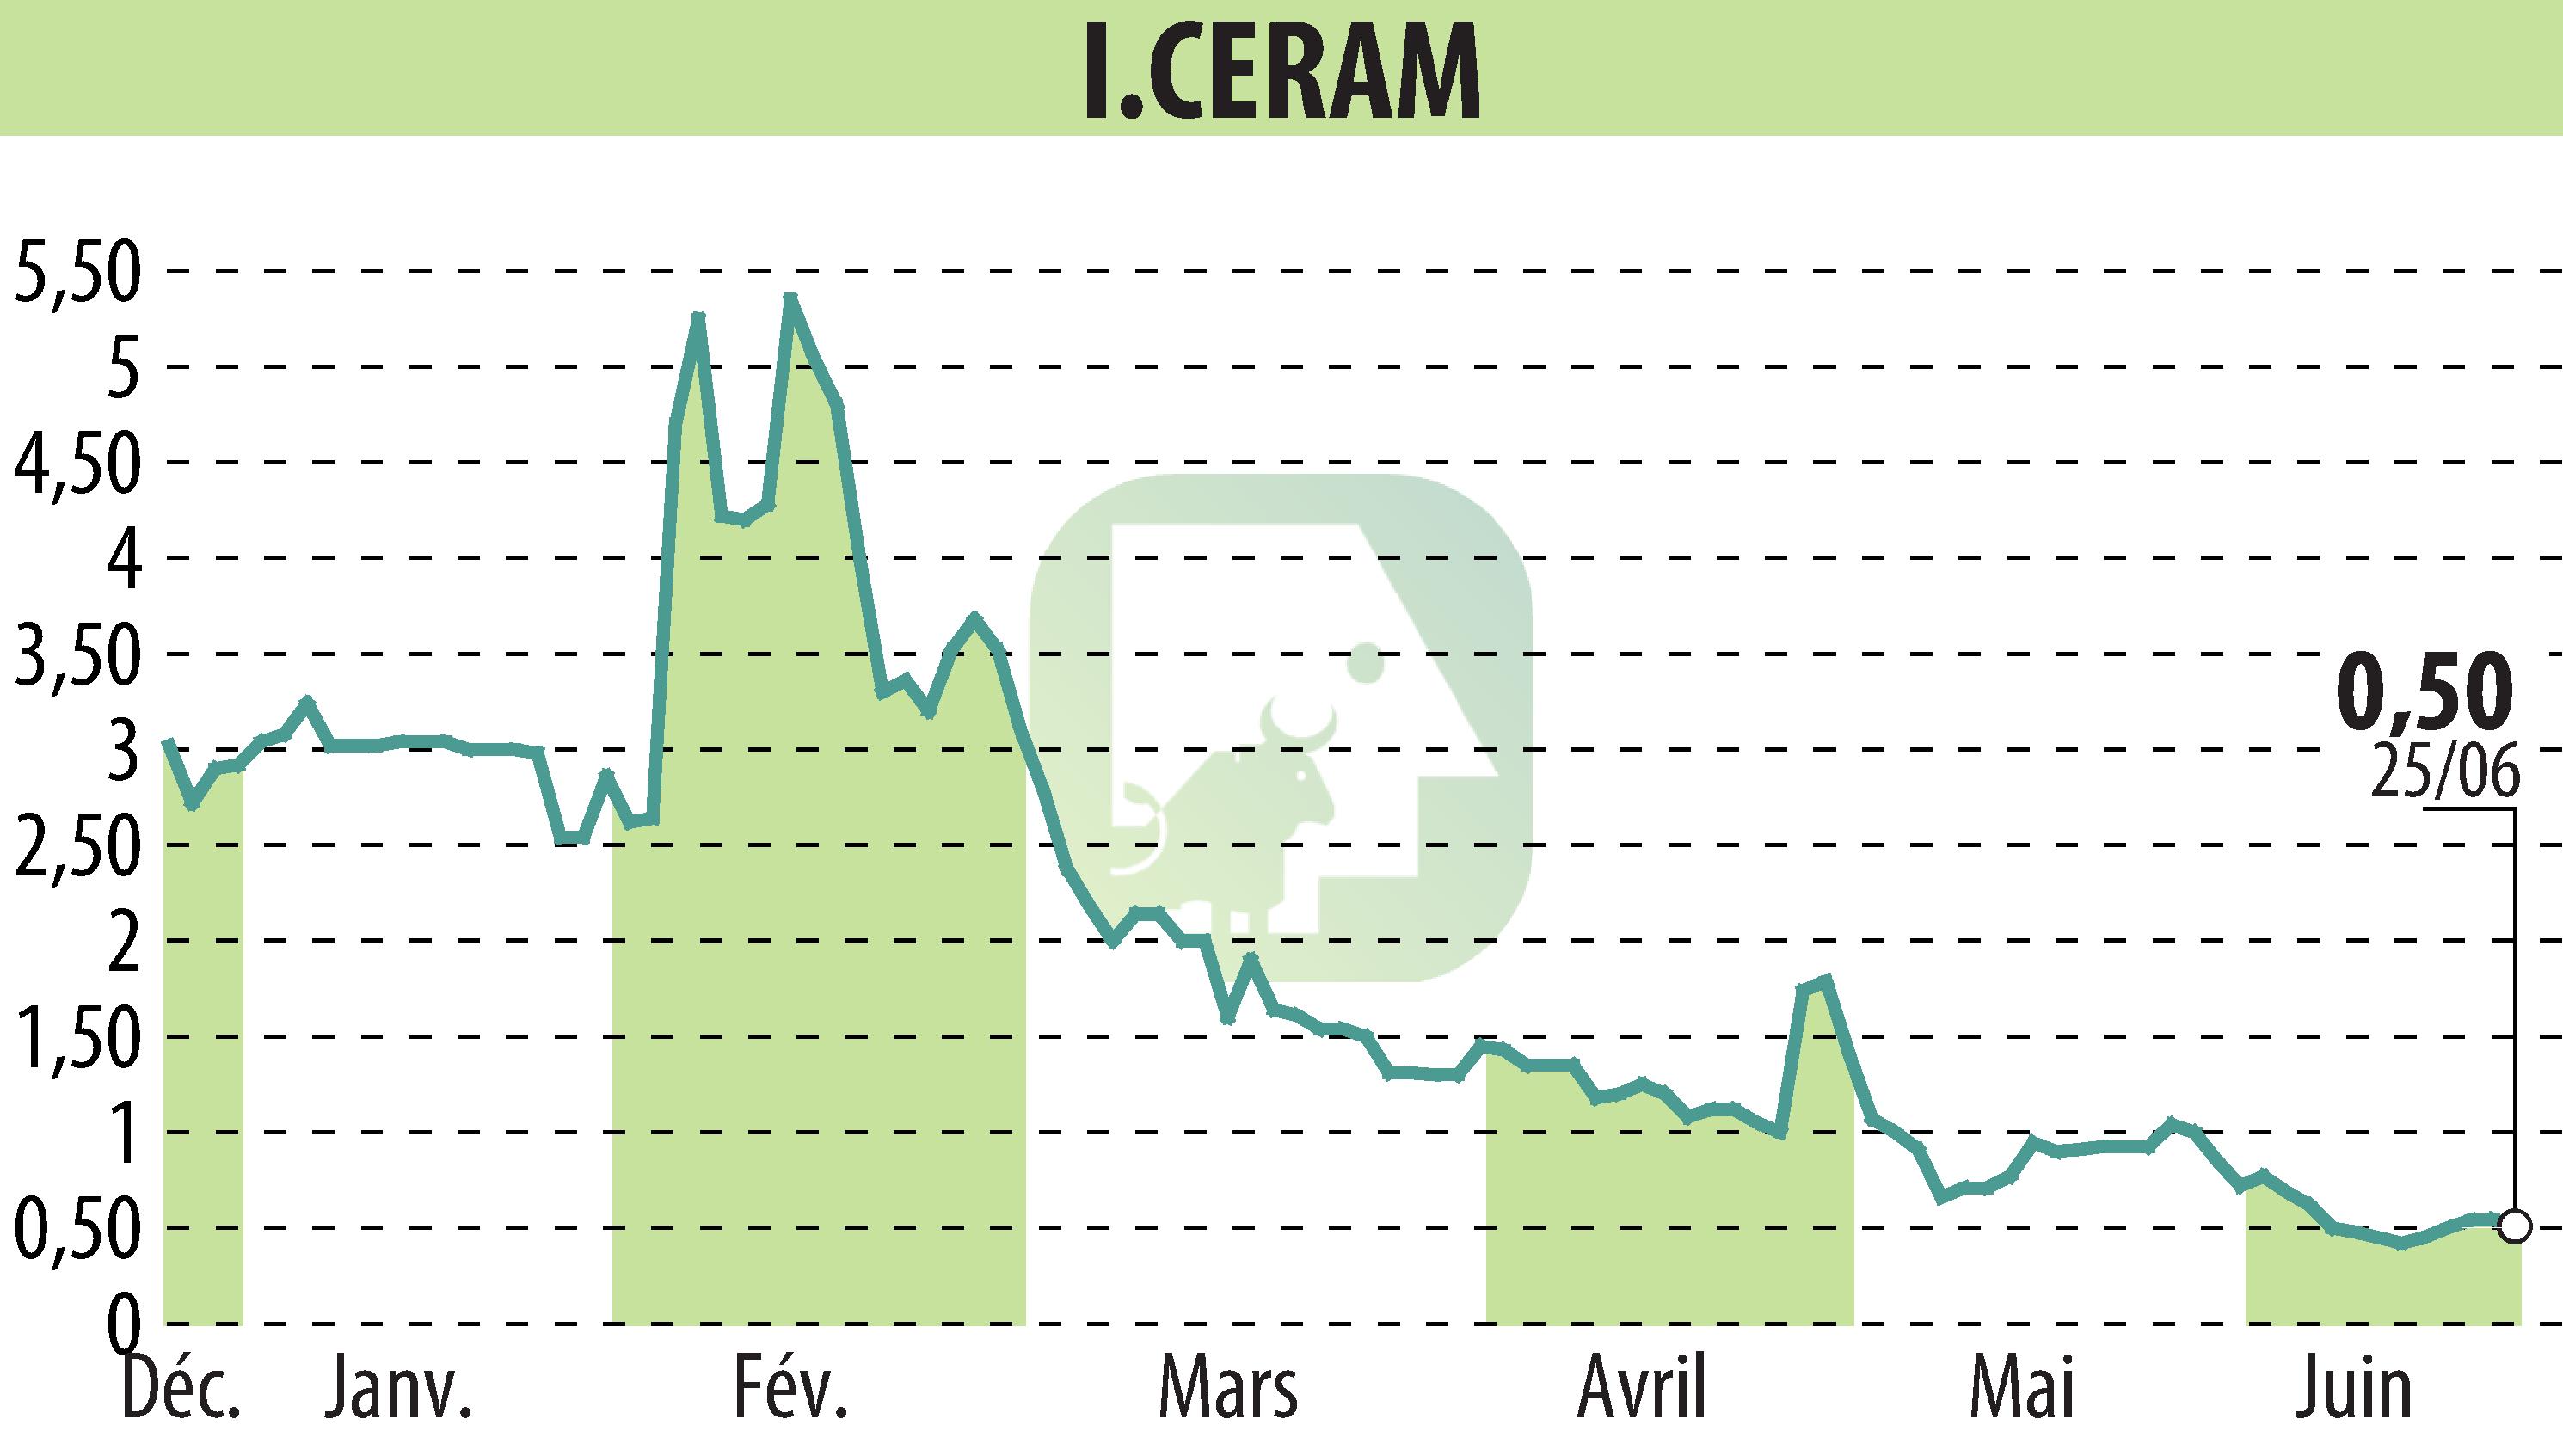 Stock price chart of I-CERAM (EPA:ALICR) showing fluctuations.